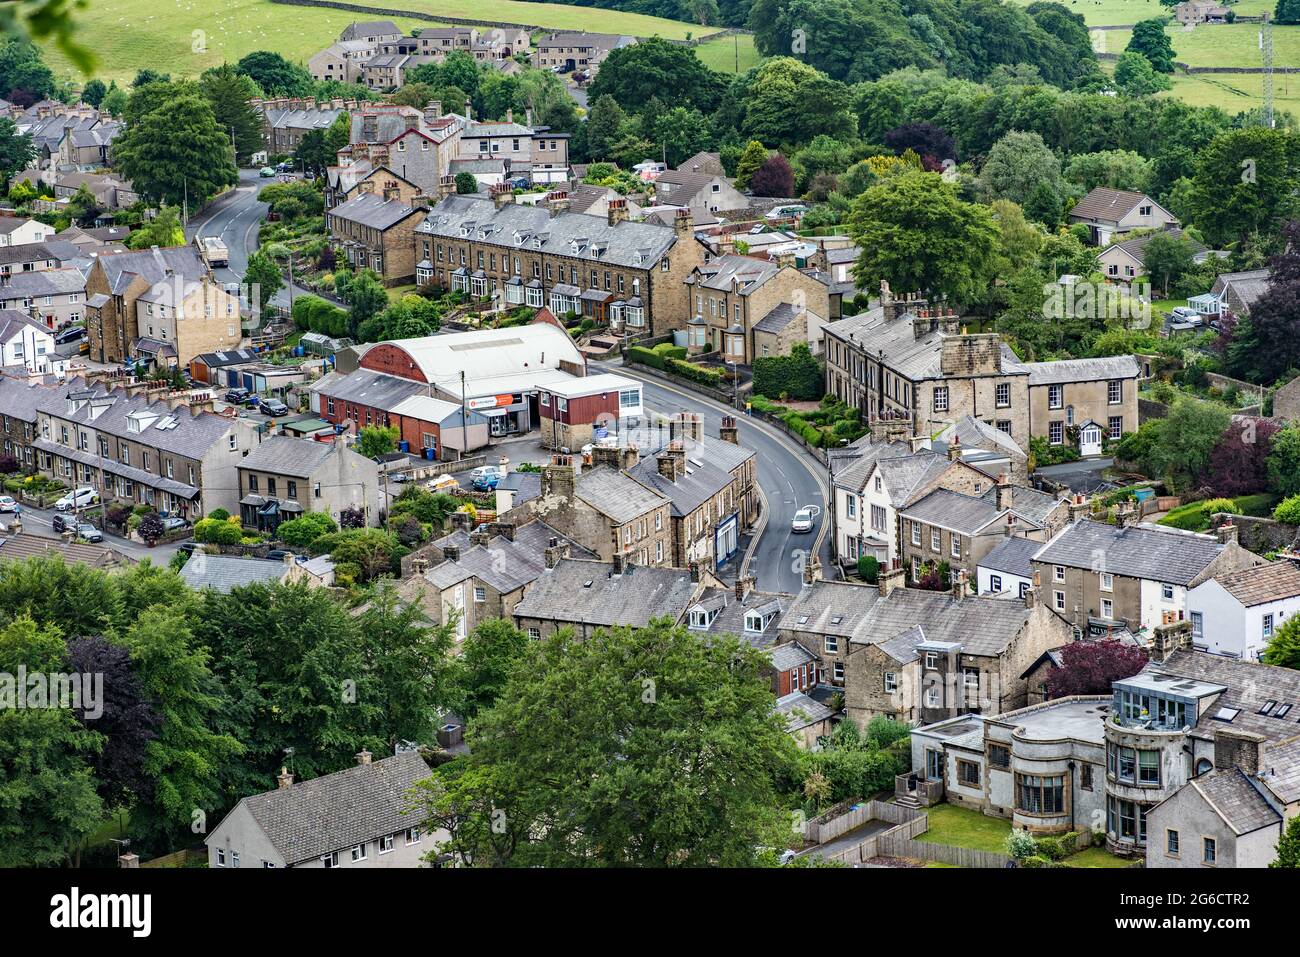 The market town of Settle Stock Photo